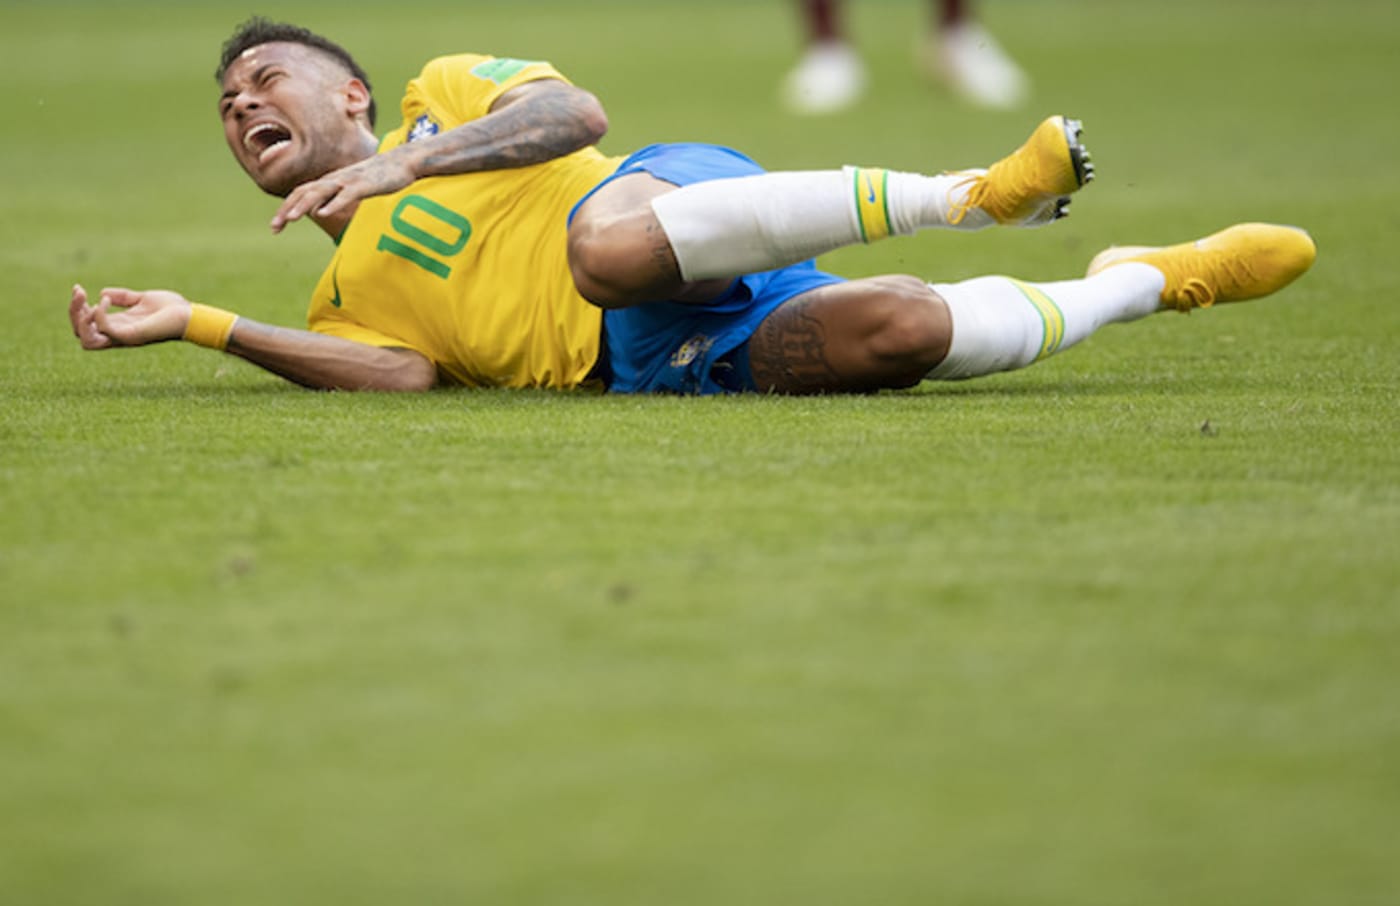 Neymar Receives the Meme Treatment After Over the Top Flop | Complex